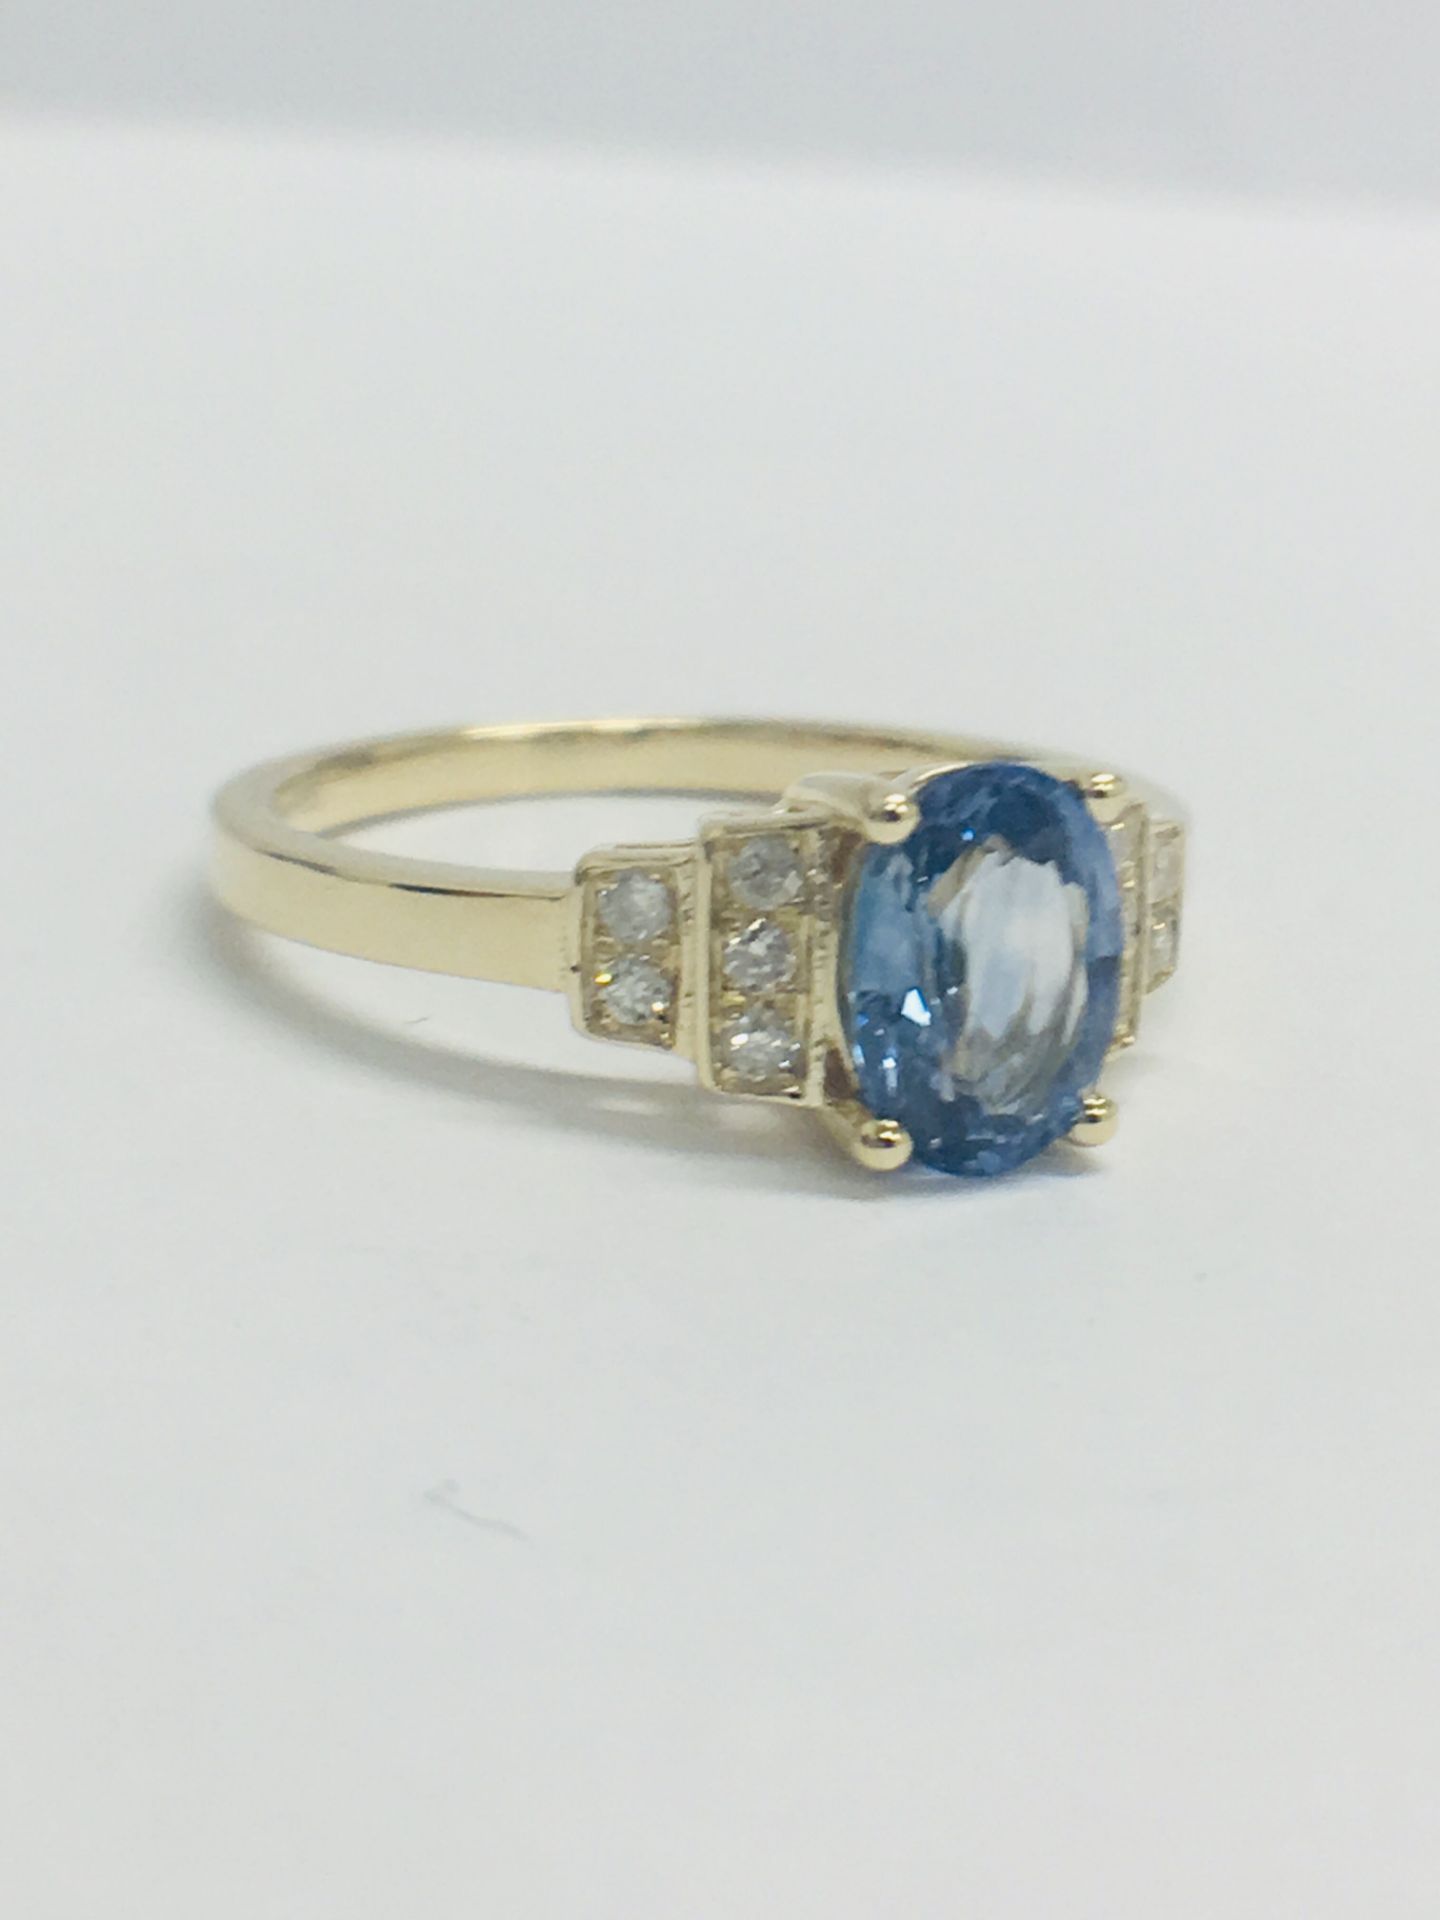 14ct Yellow Gold Sapphire and Diamond Ring. - Image 8 of 10